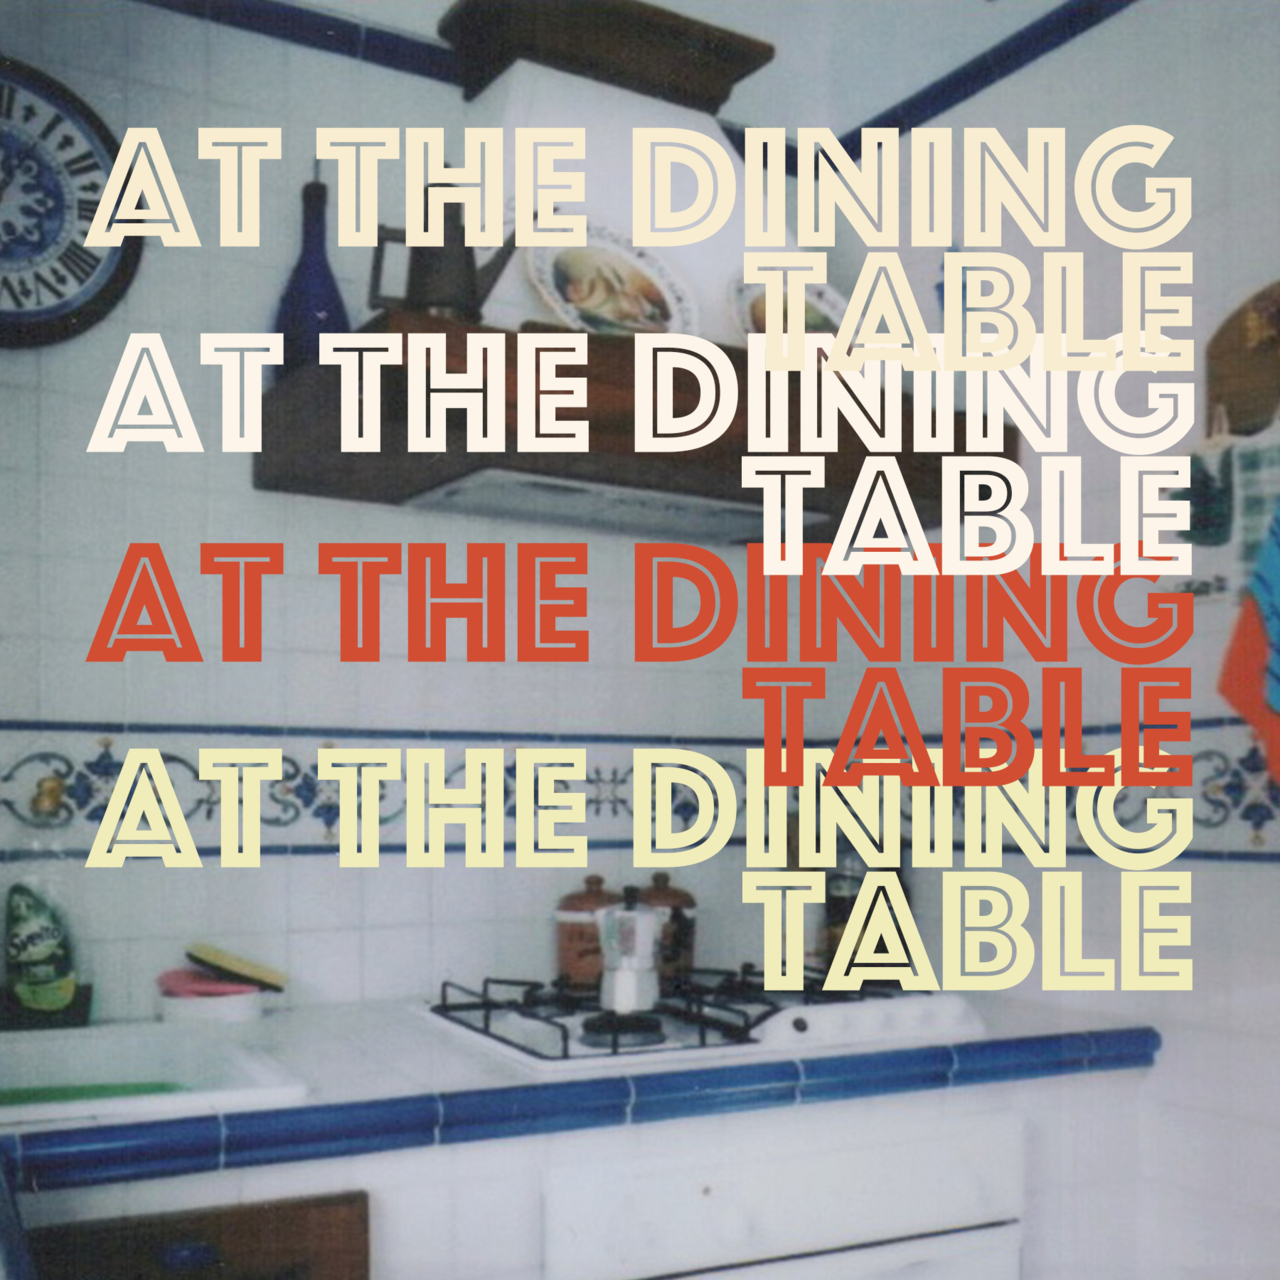 At The Dining Table by Jennifer Paccione Angulo